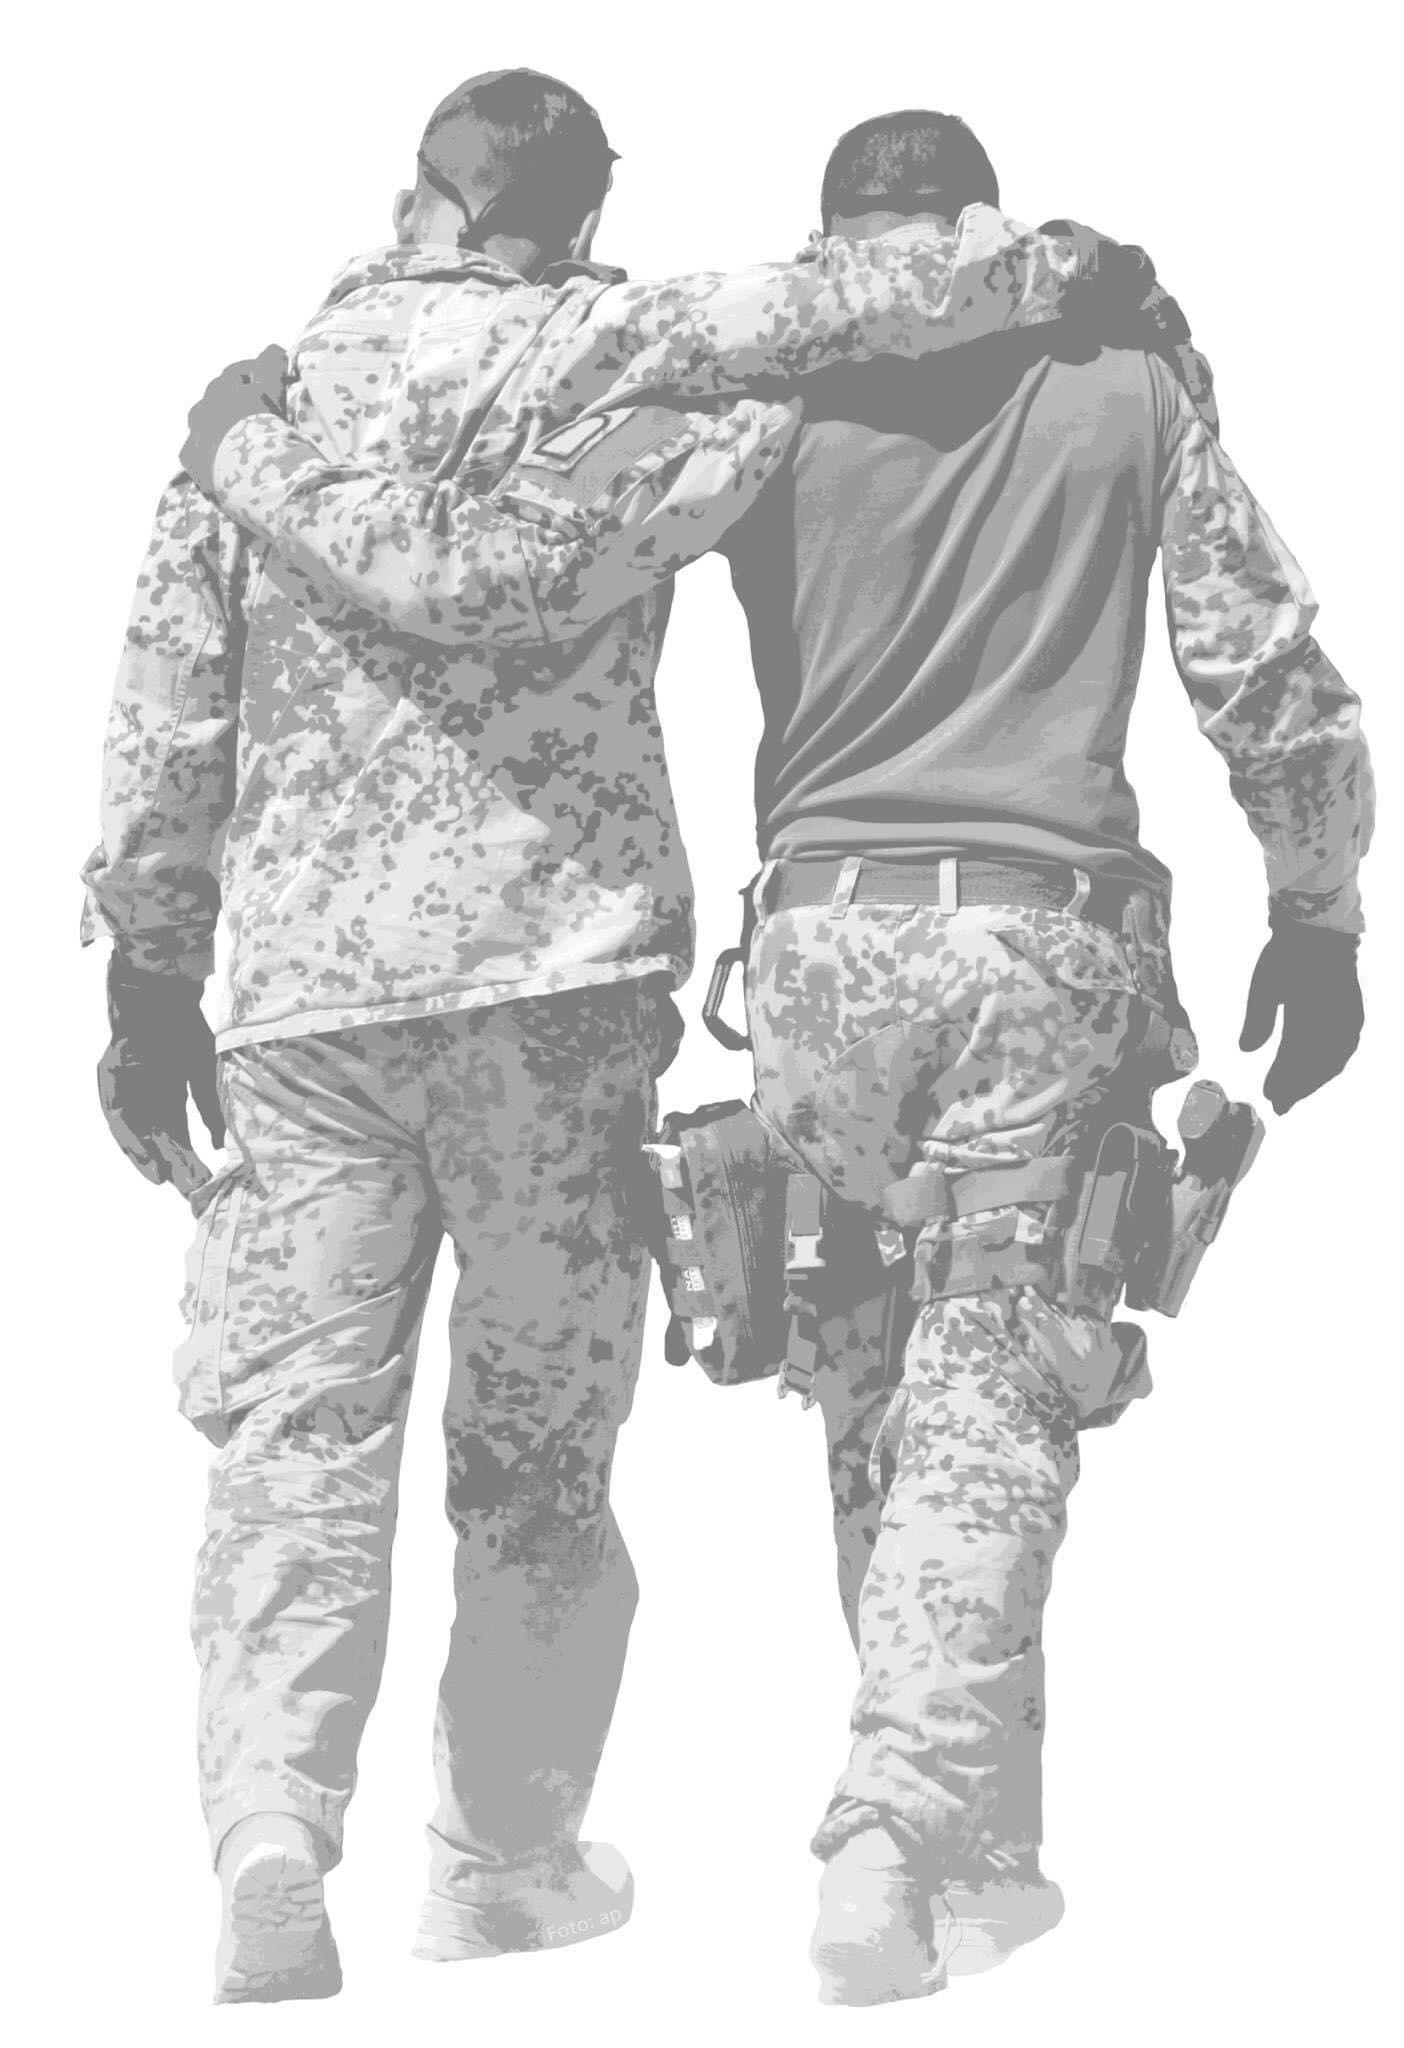 Two soldiers walking while putting an arm around each others shoulders